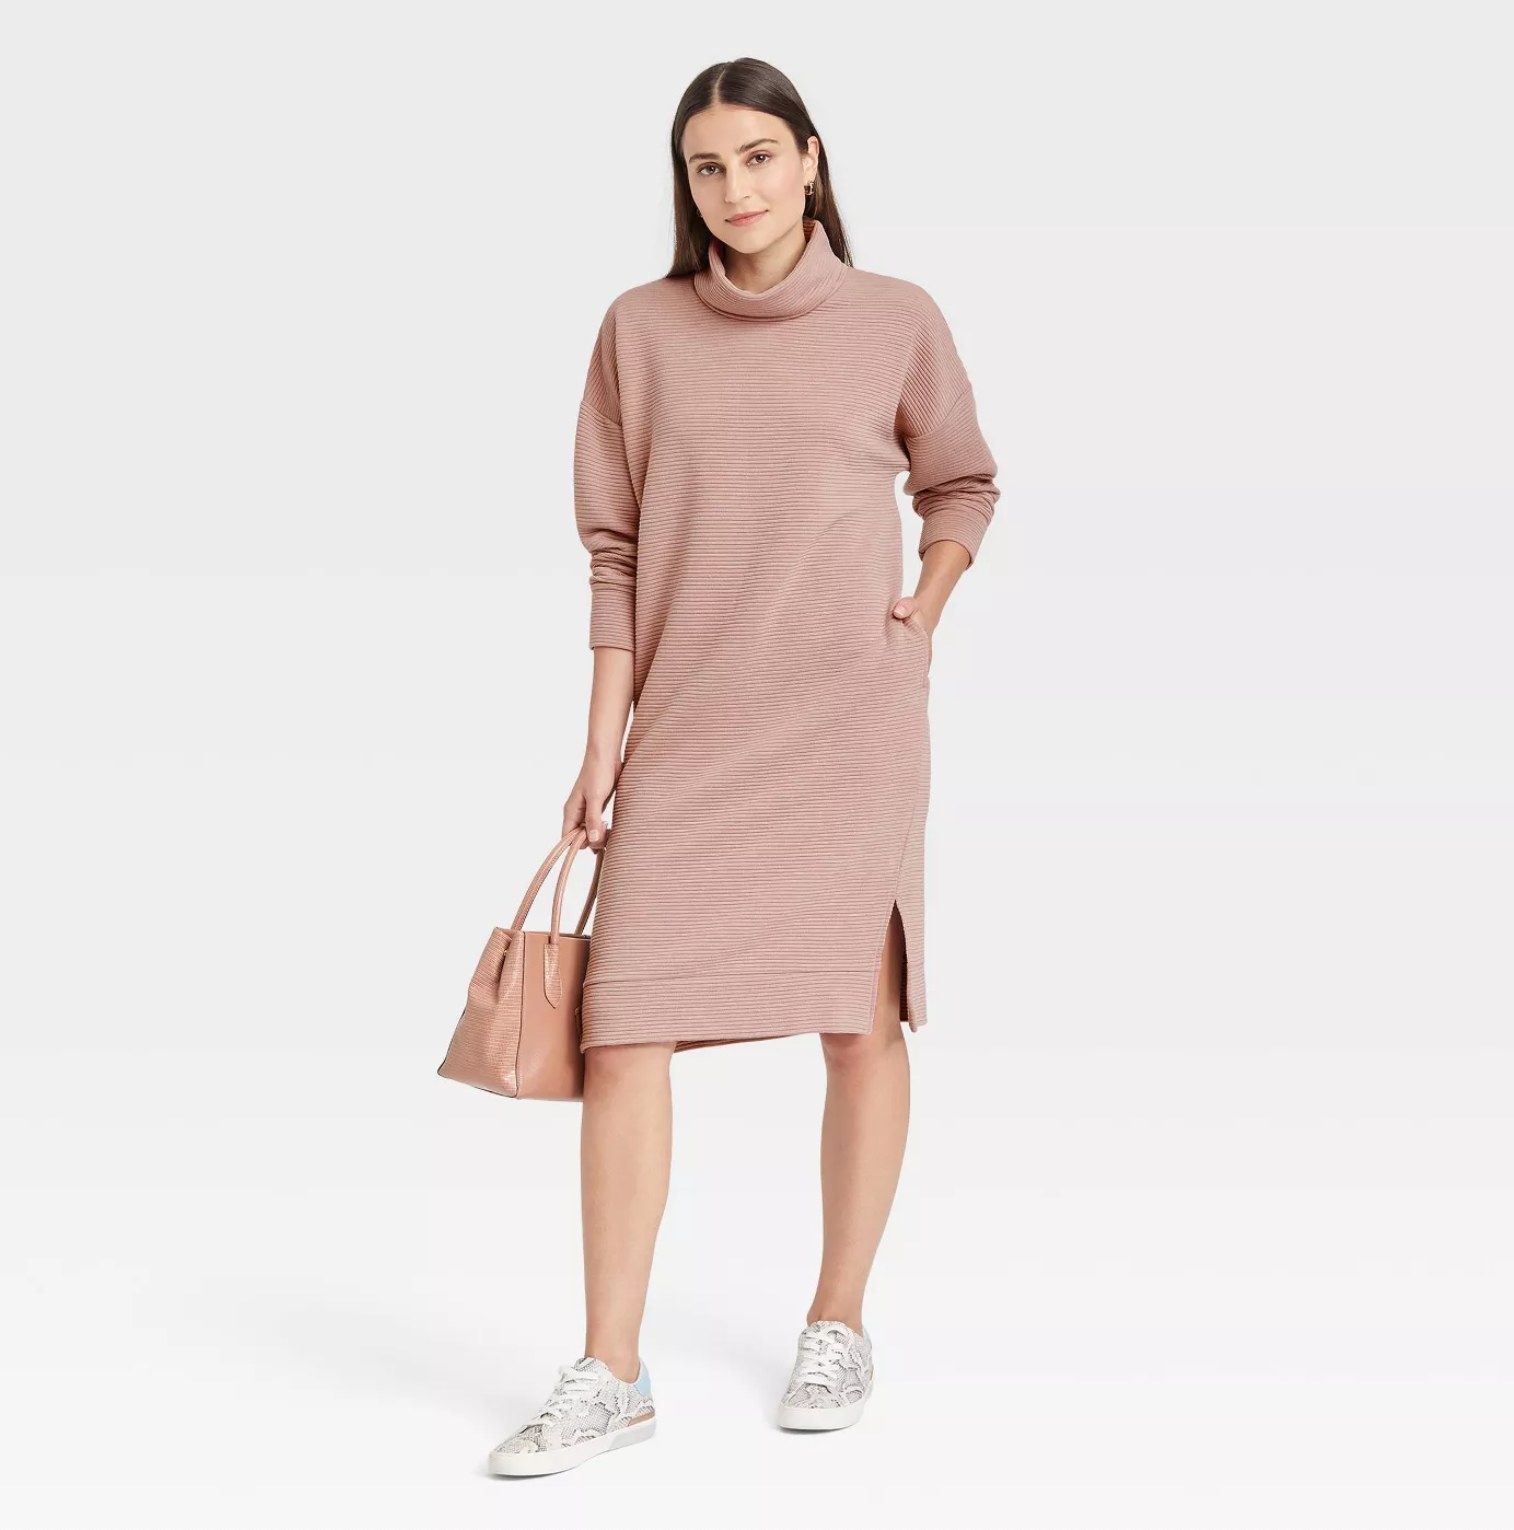 model wearing the dress in pink with white sneakers carrying a pink handbag